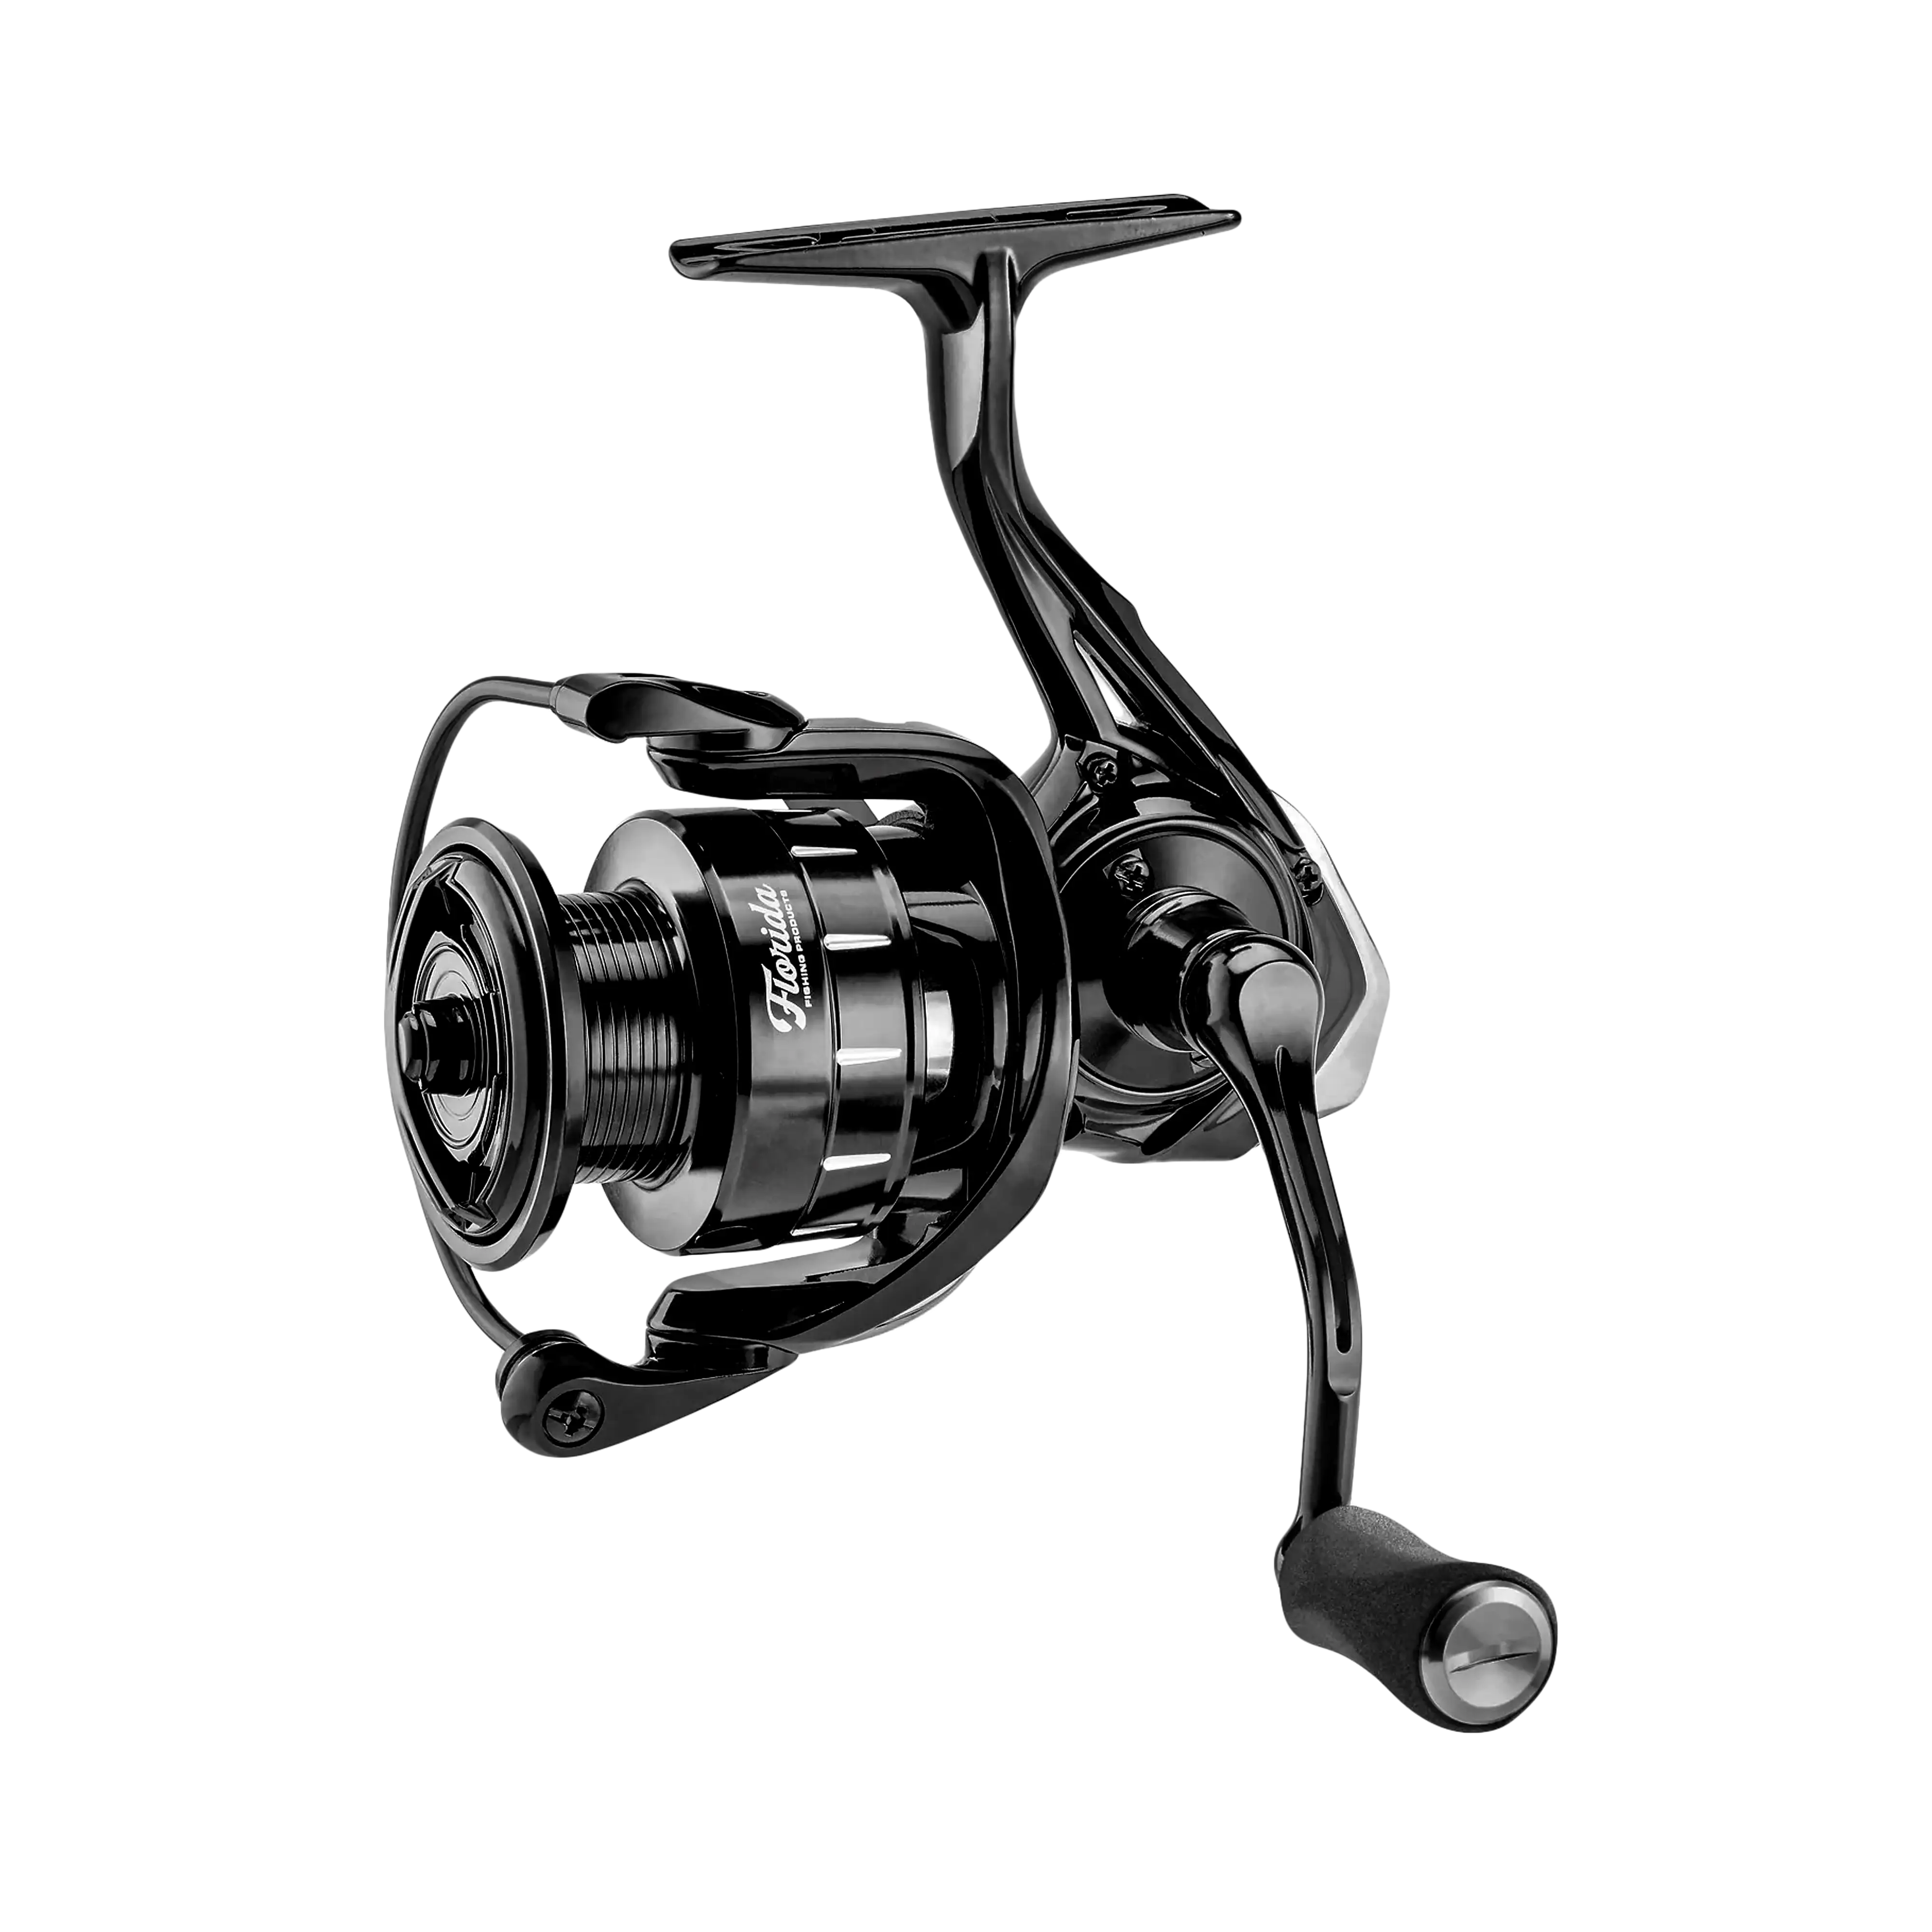 The New Ultralight Standard of Spinning Reels is here: The Team